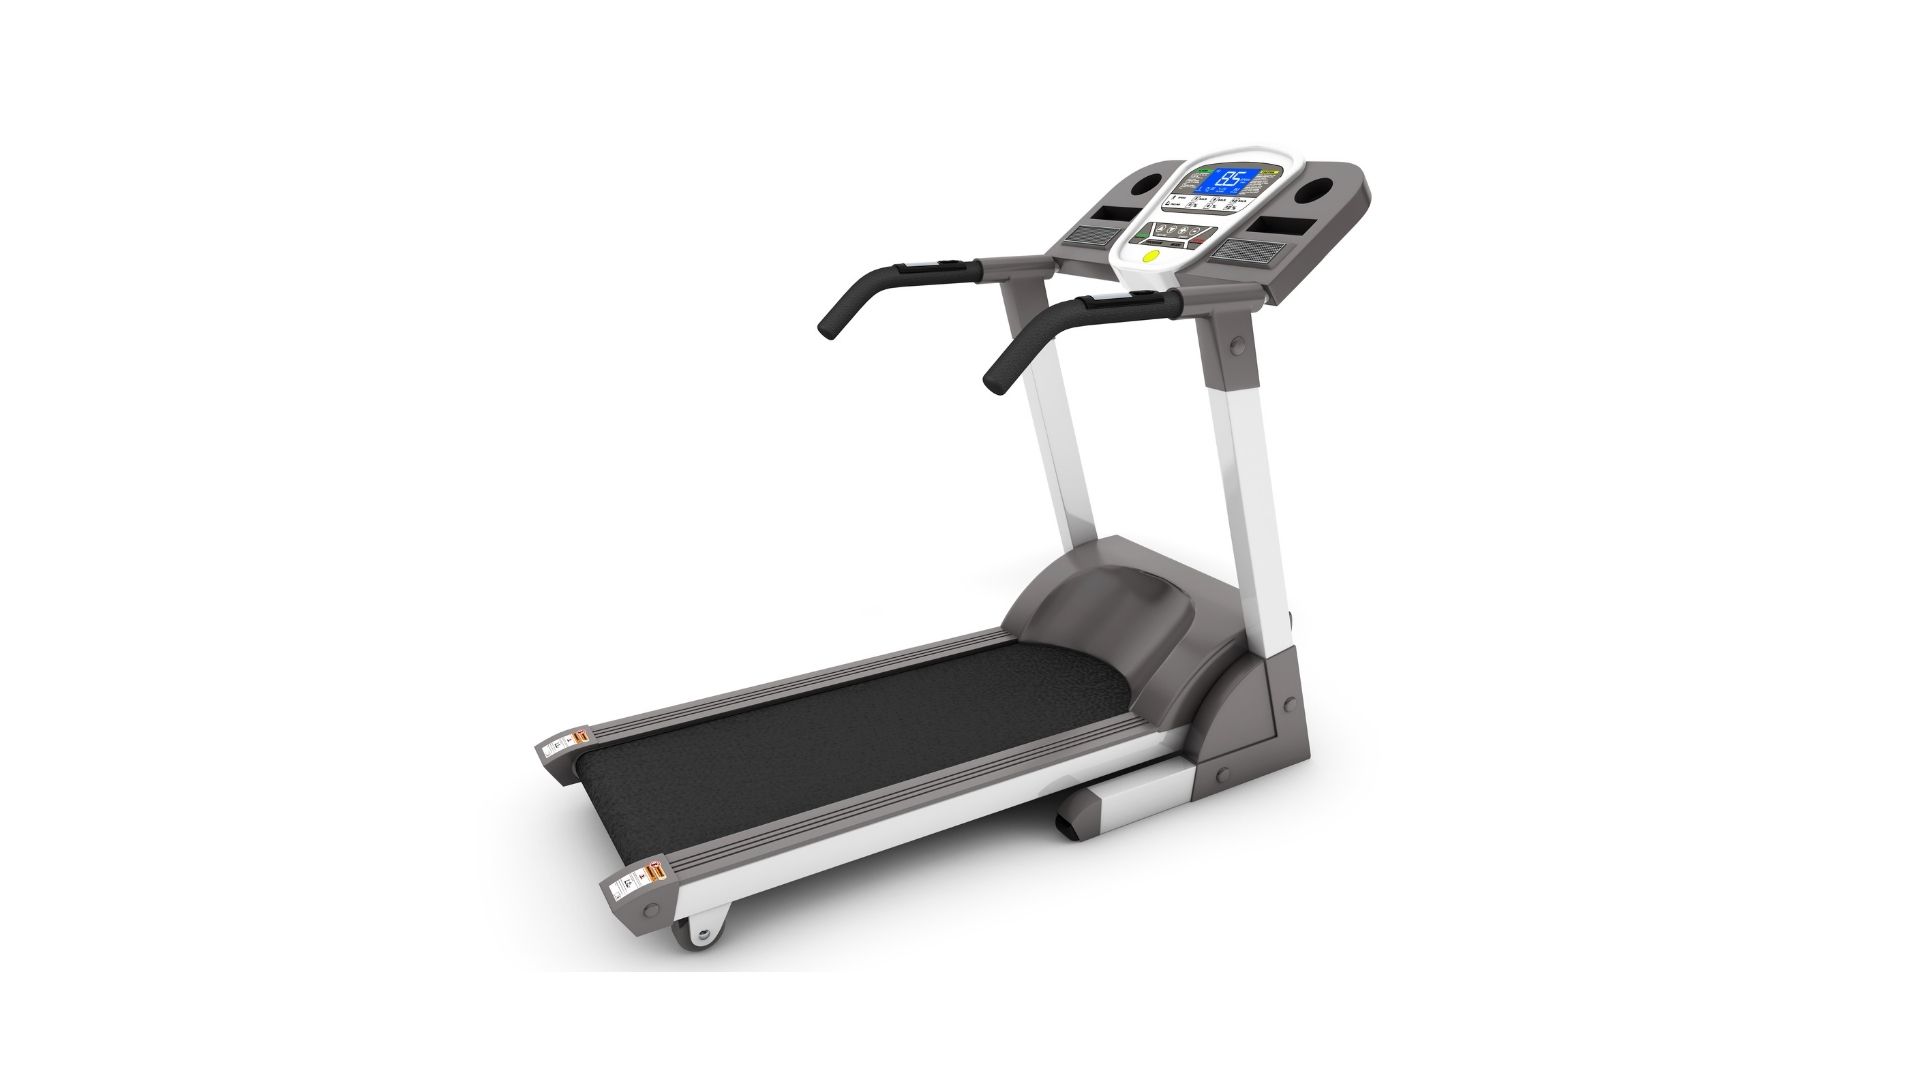 Nustep Fitness India Equipment Manufacturer and Supplier